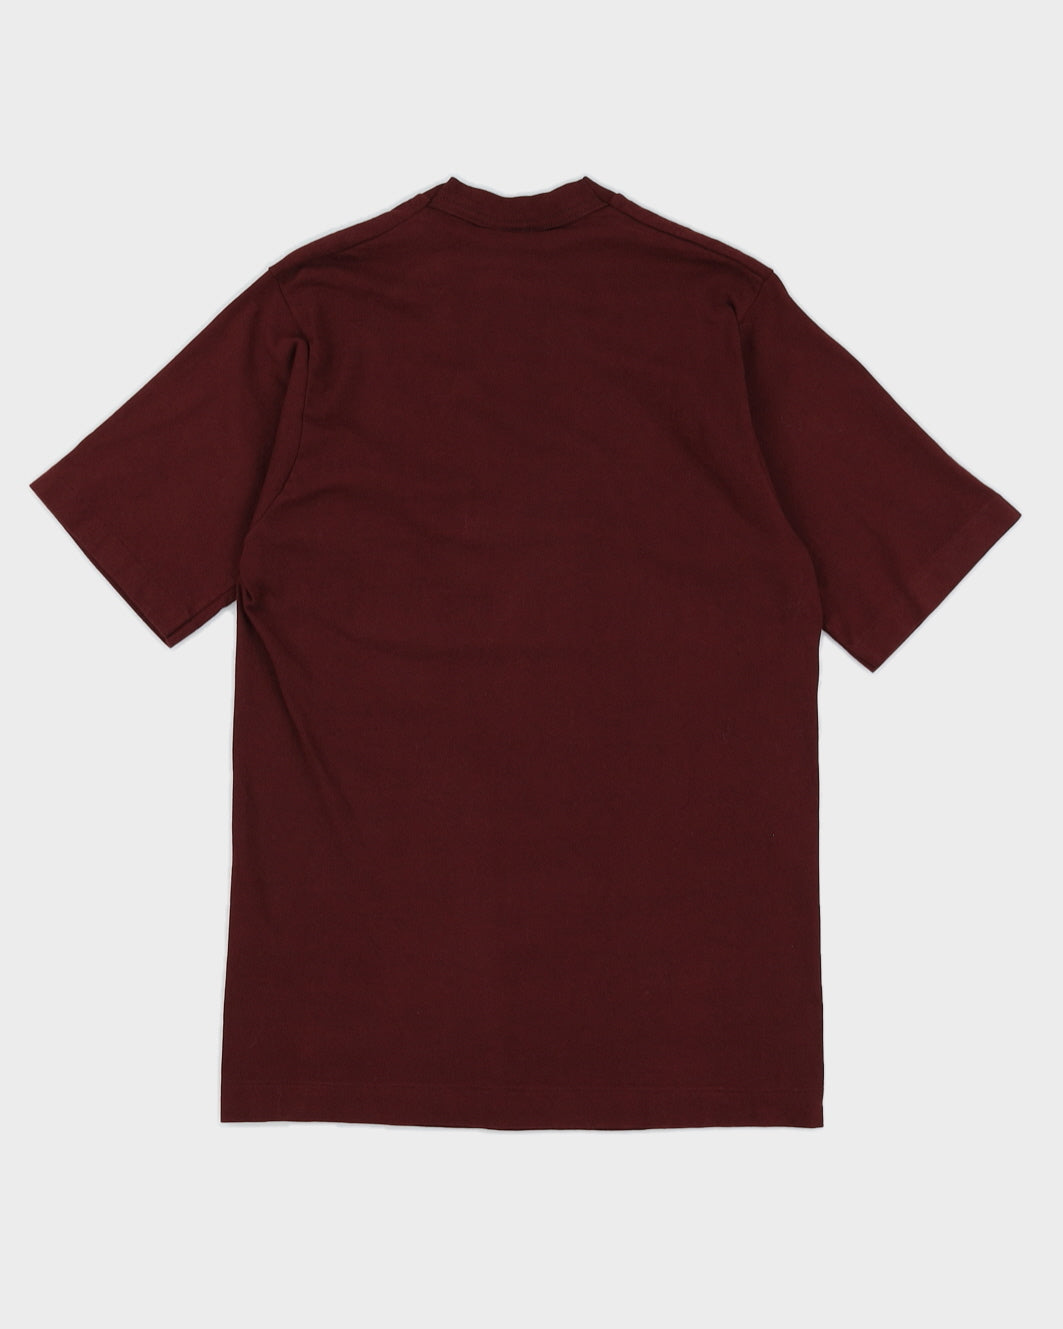 Vintage 90s Soccer Classic Maroon T-Shirt - M